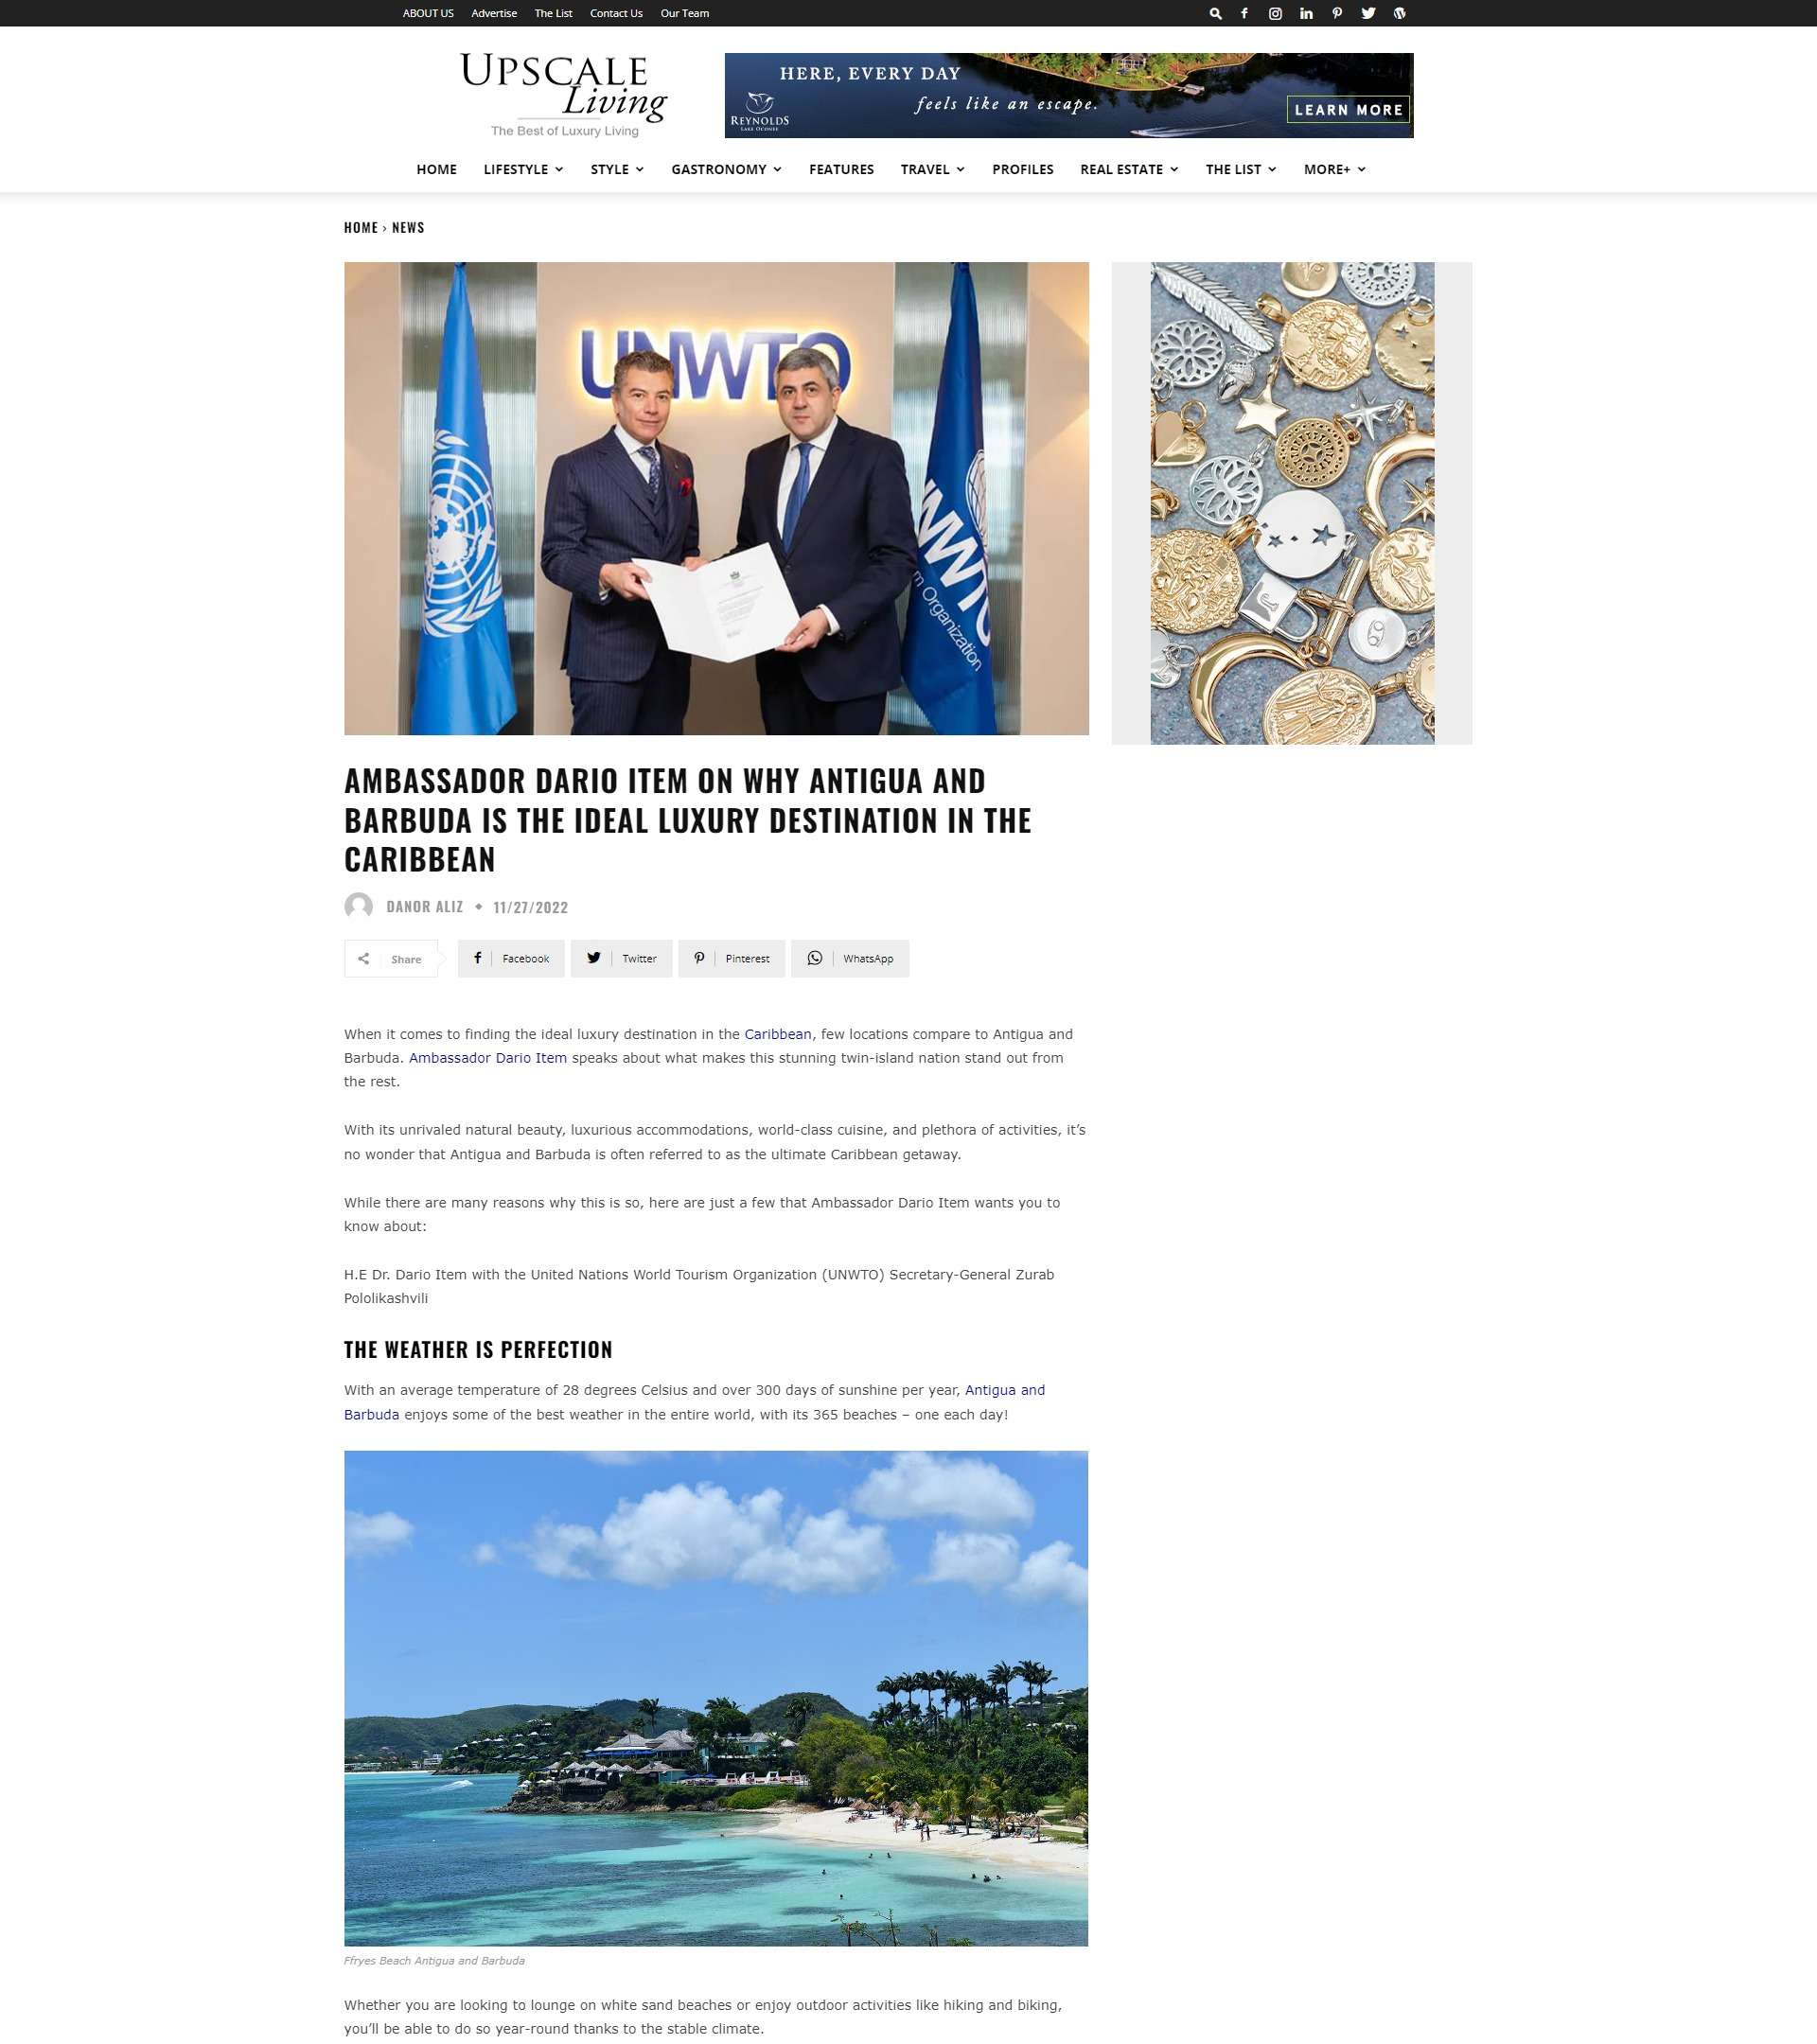 Ambassador Dario Item on why Antigua and Barbuda is the ideal luxury destination in the caribbean